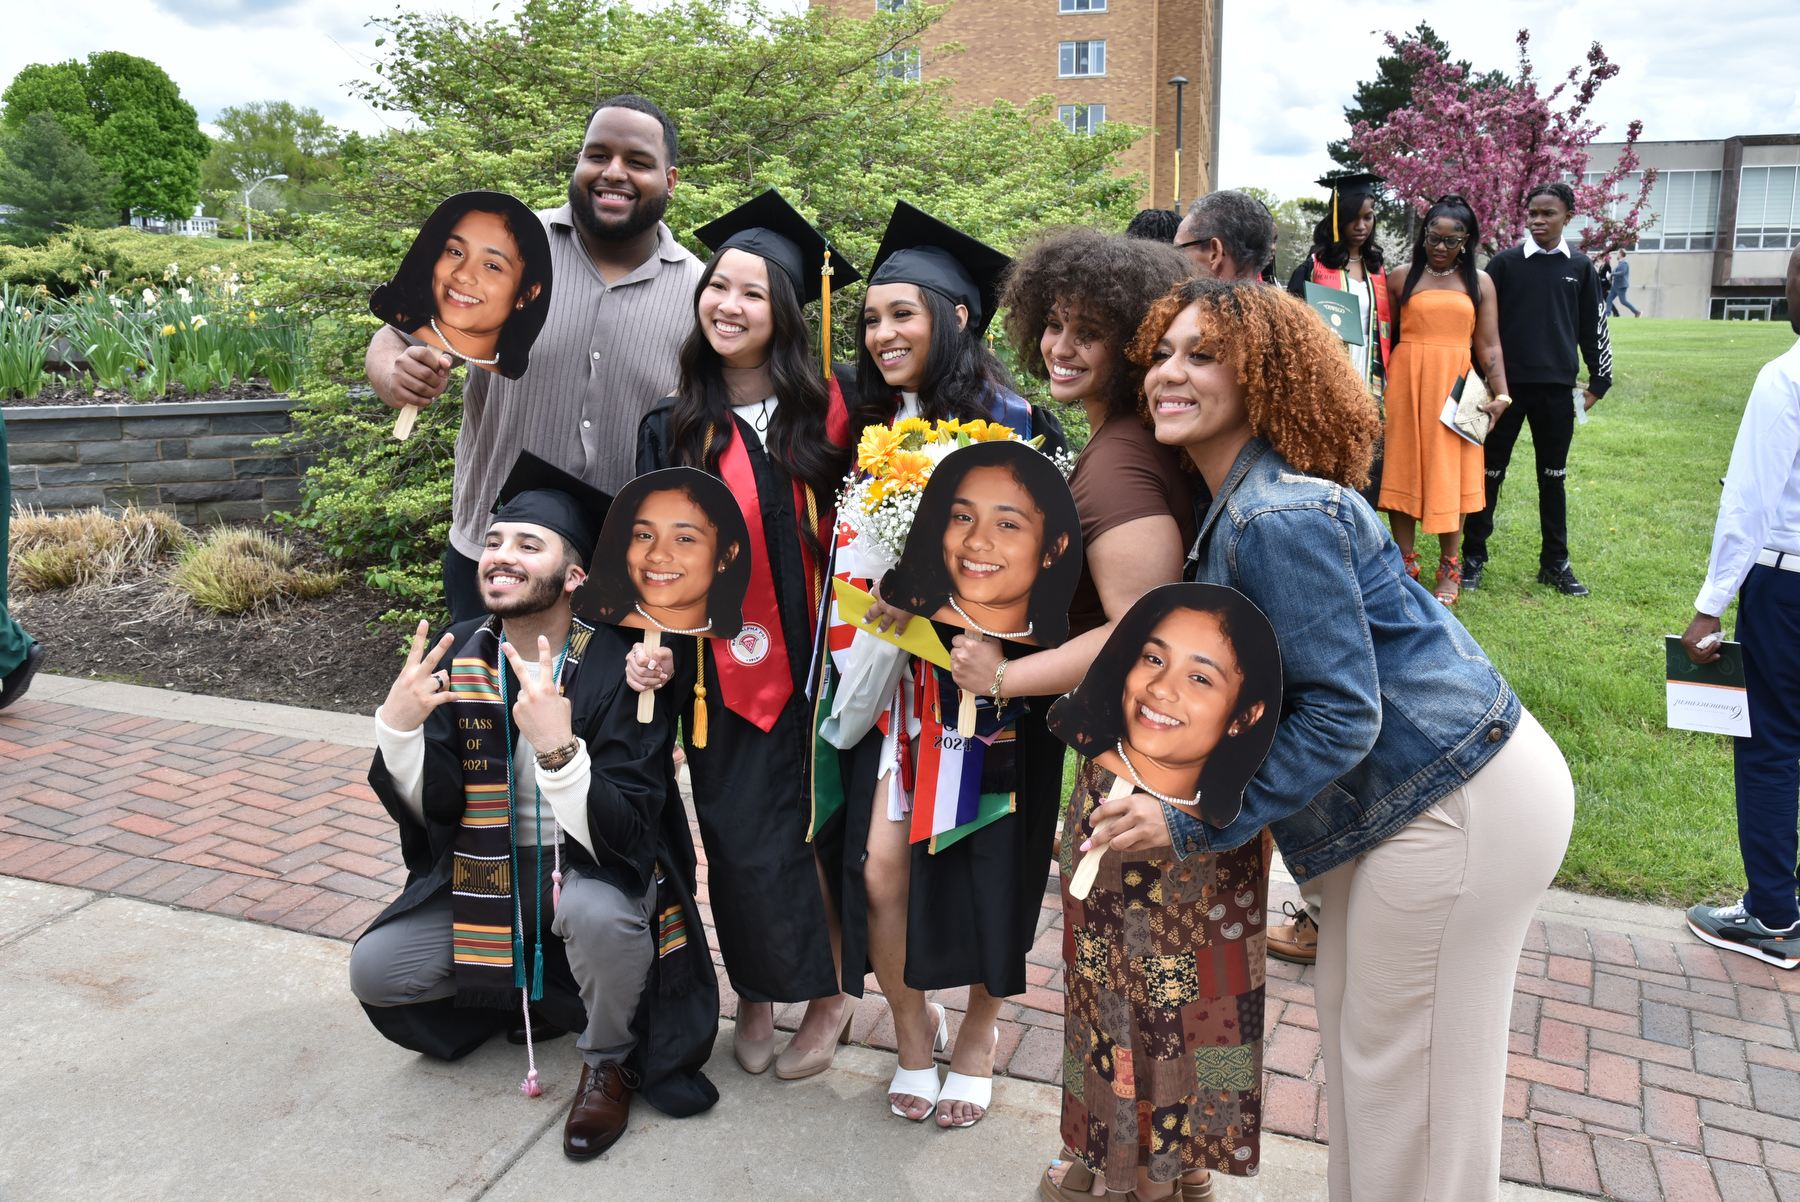 Family members found many ways to support and celebrate their May graduates.